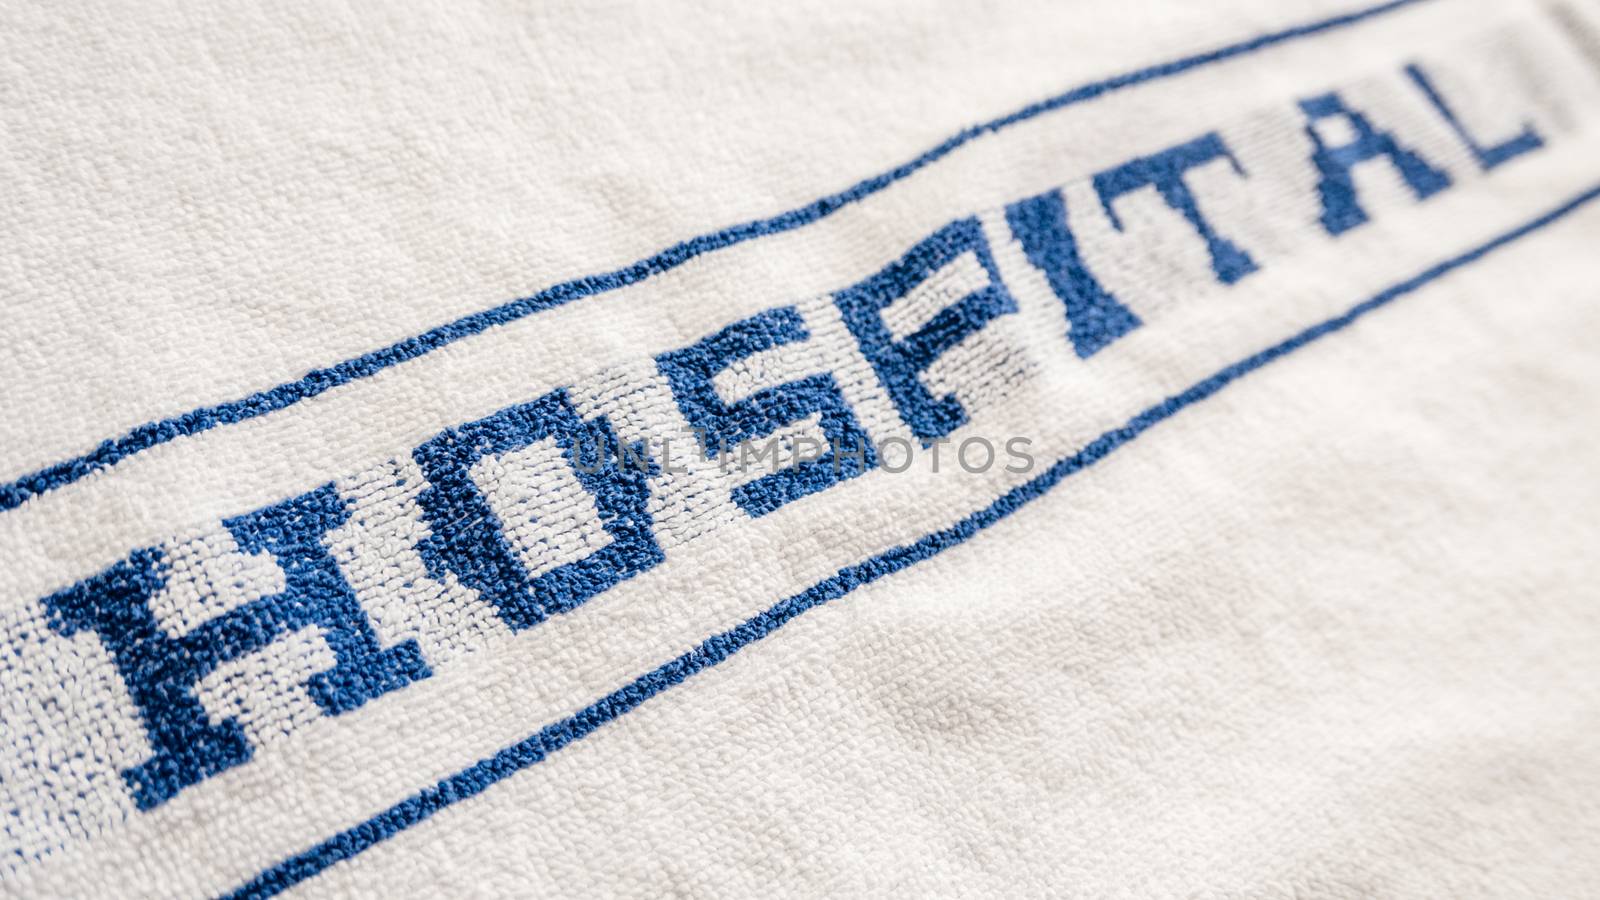 Detail Of A Blue And White Hospital Branded Towel